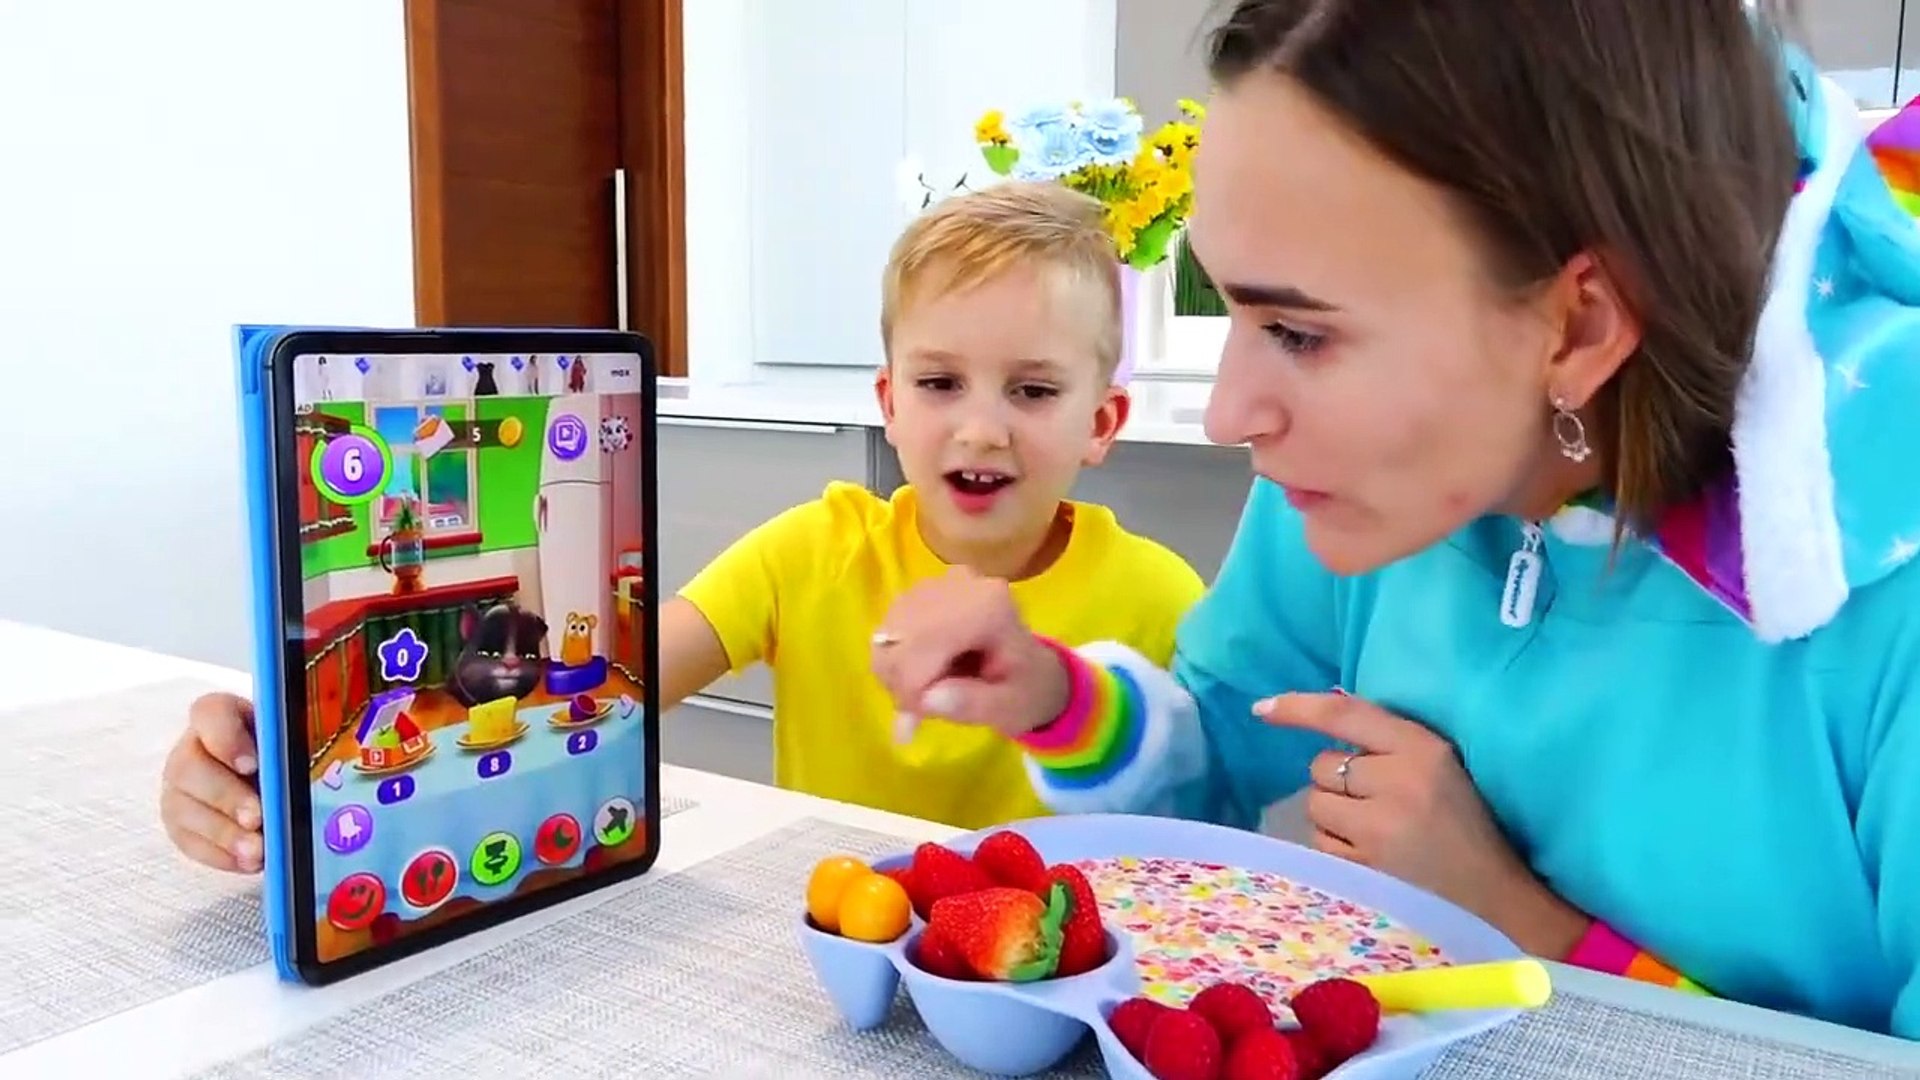 Vlad and Niki play with toys - Collection video for kids - Vlad and Nikita  New Episodes 2021 videos for children and kids - فلاد ونيكي يلعبان بالألعاب  - مجموعة فيديو للأطفال - video Dailymotion